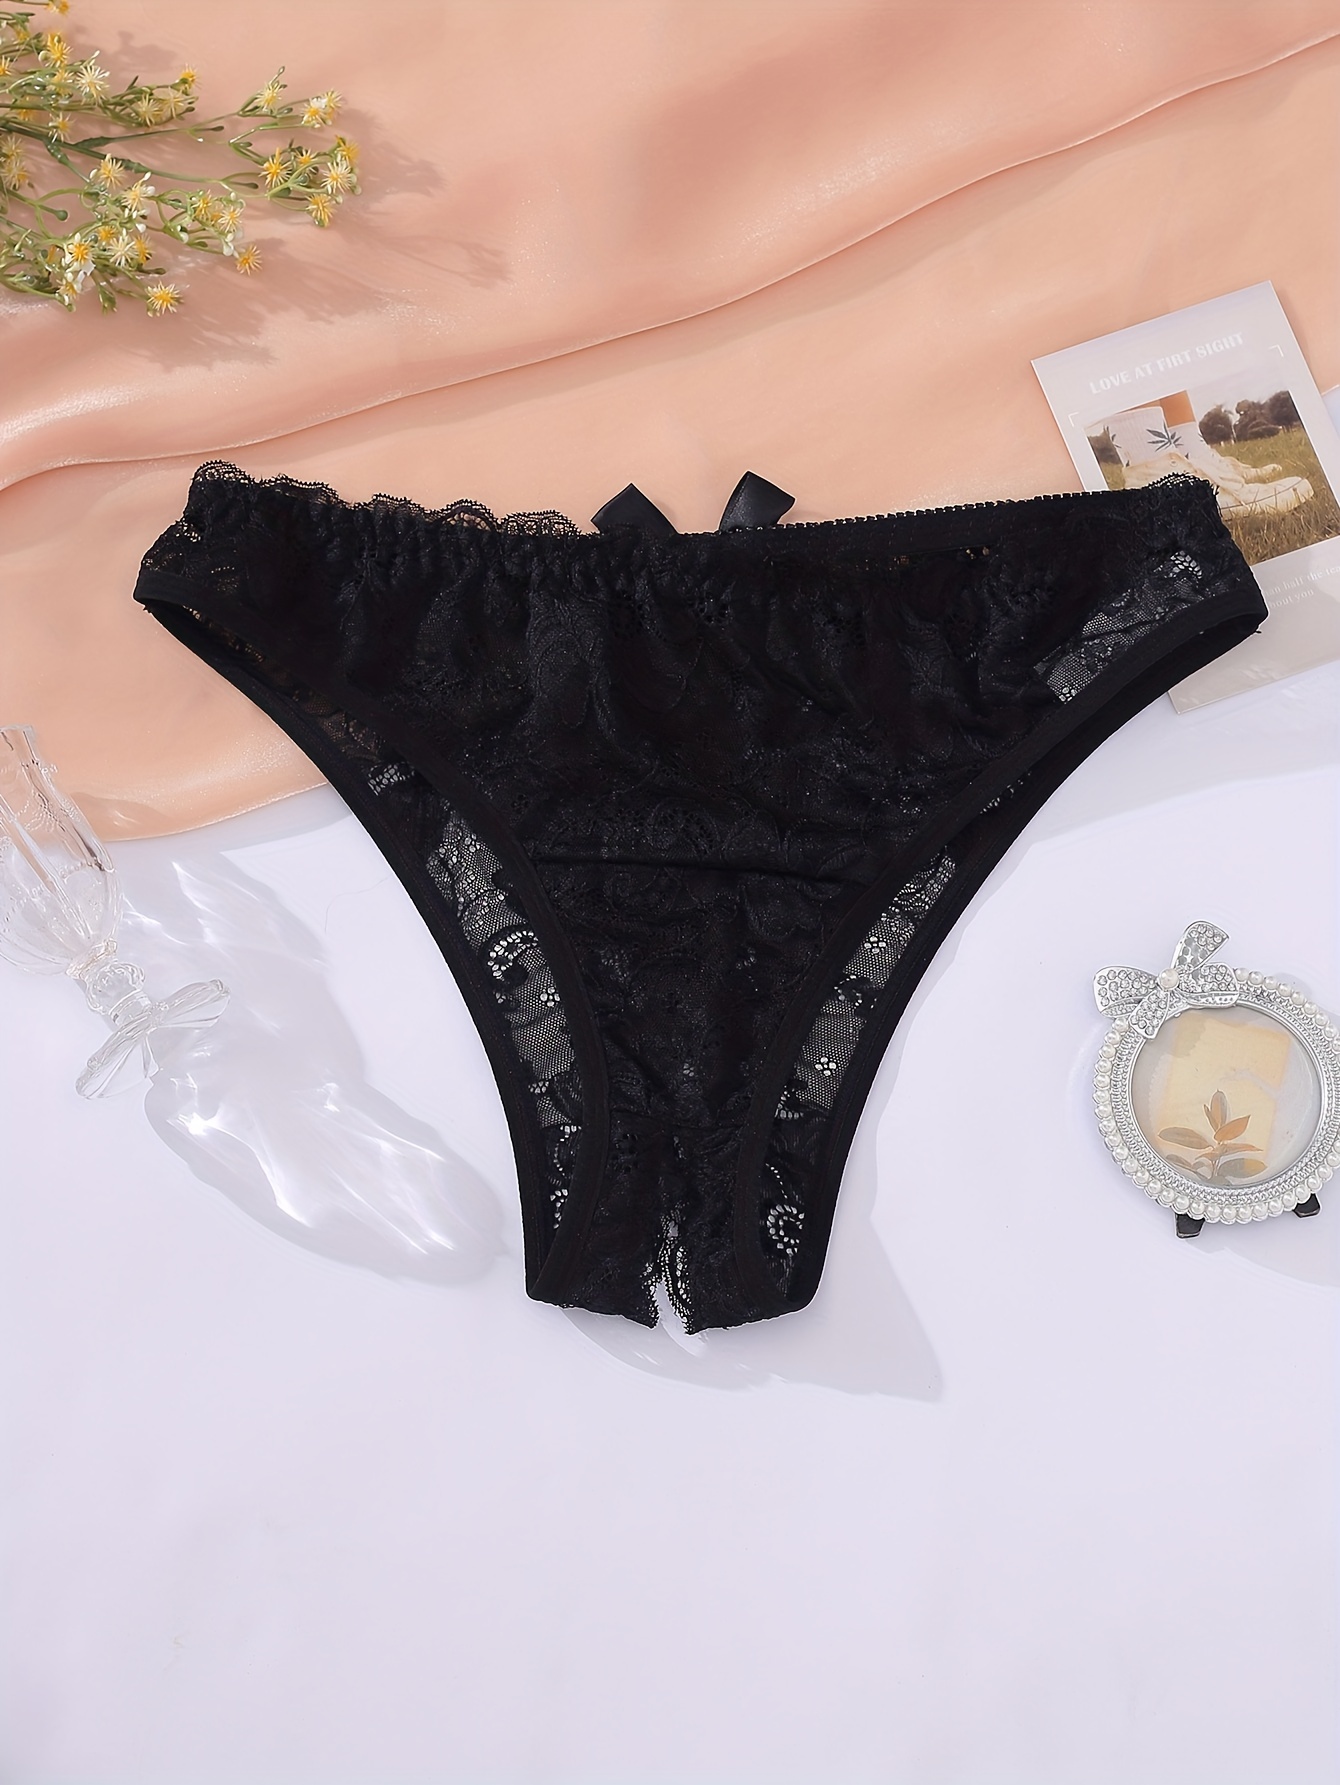 Breathable Embroidered Black Lace Crotchless Briefs For Women Sexy